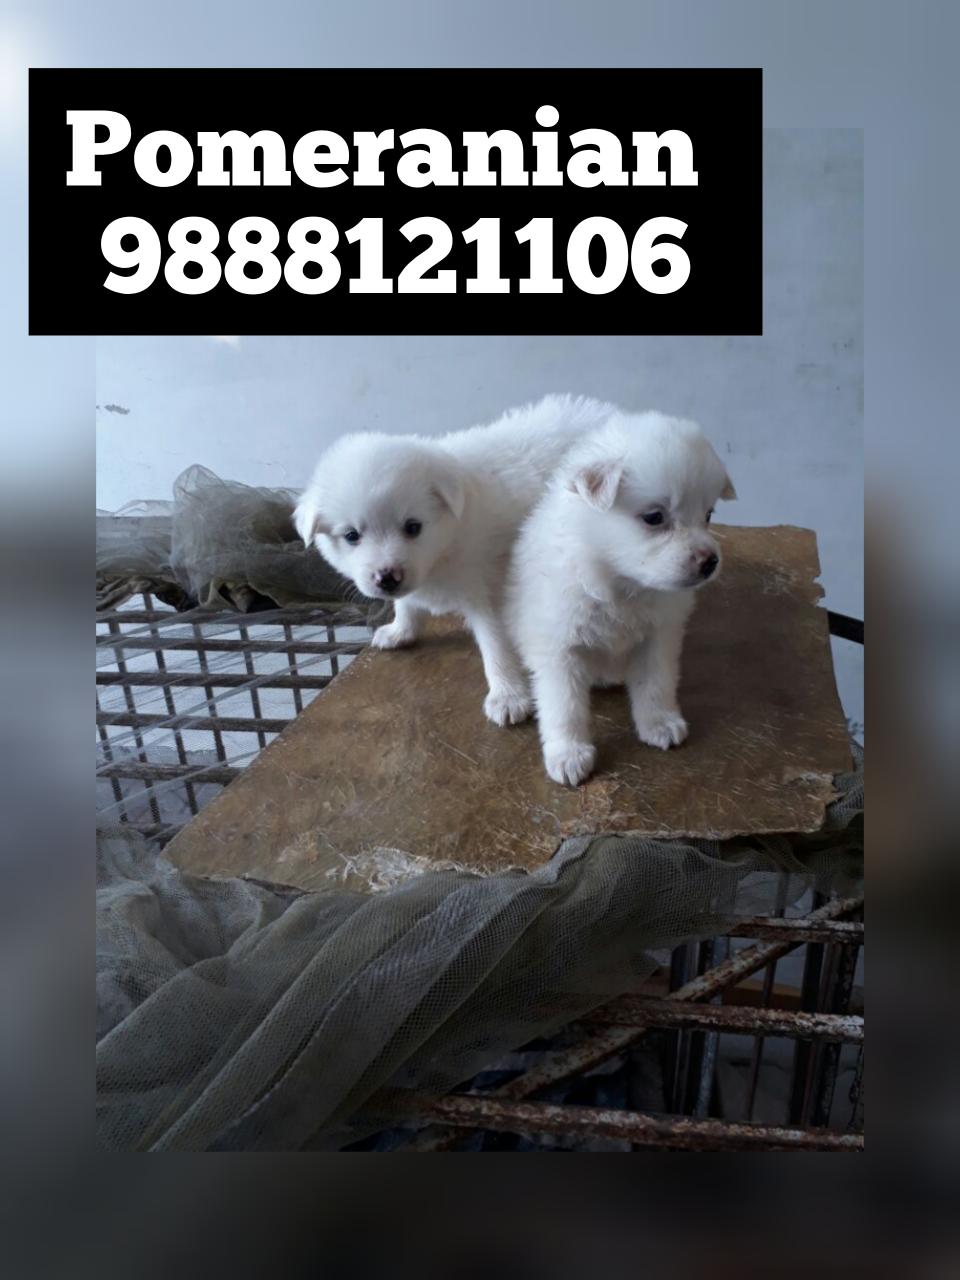 Pomeranian puppy available call 9888121106 pure breed top quality 